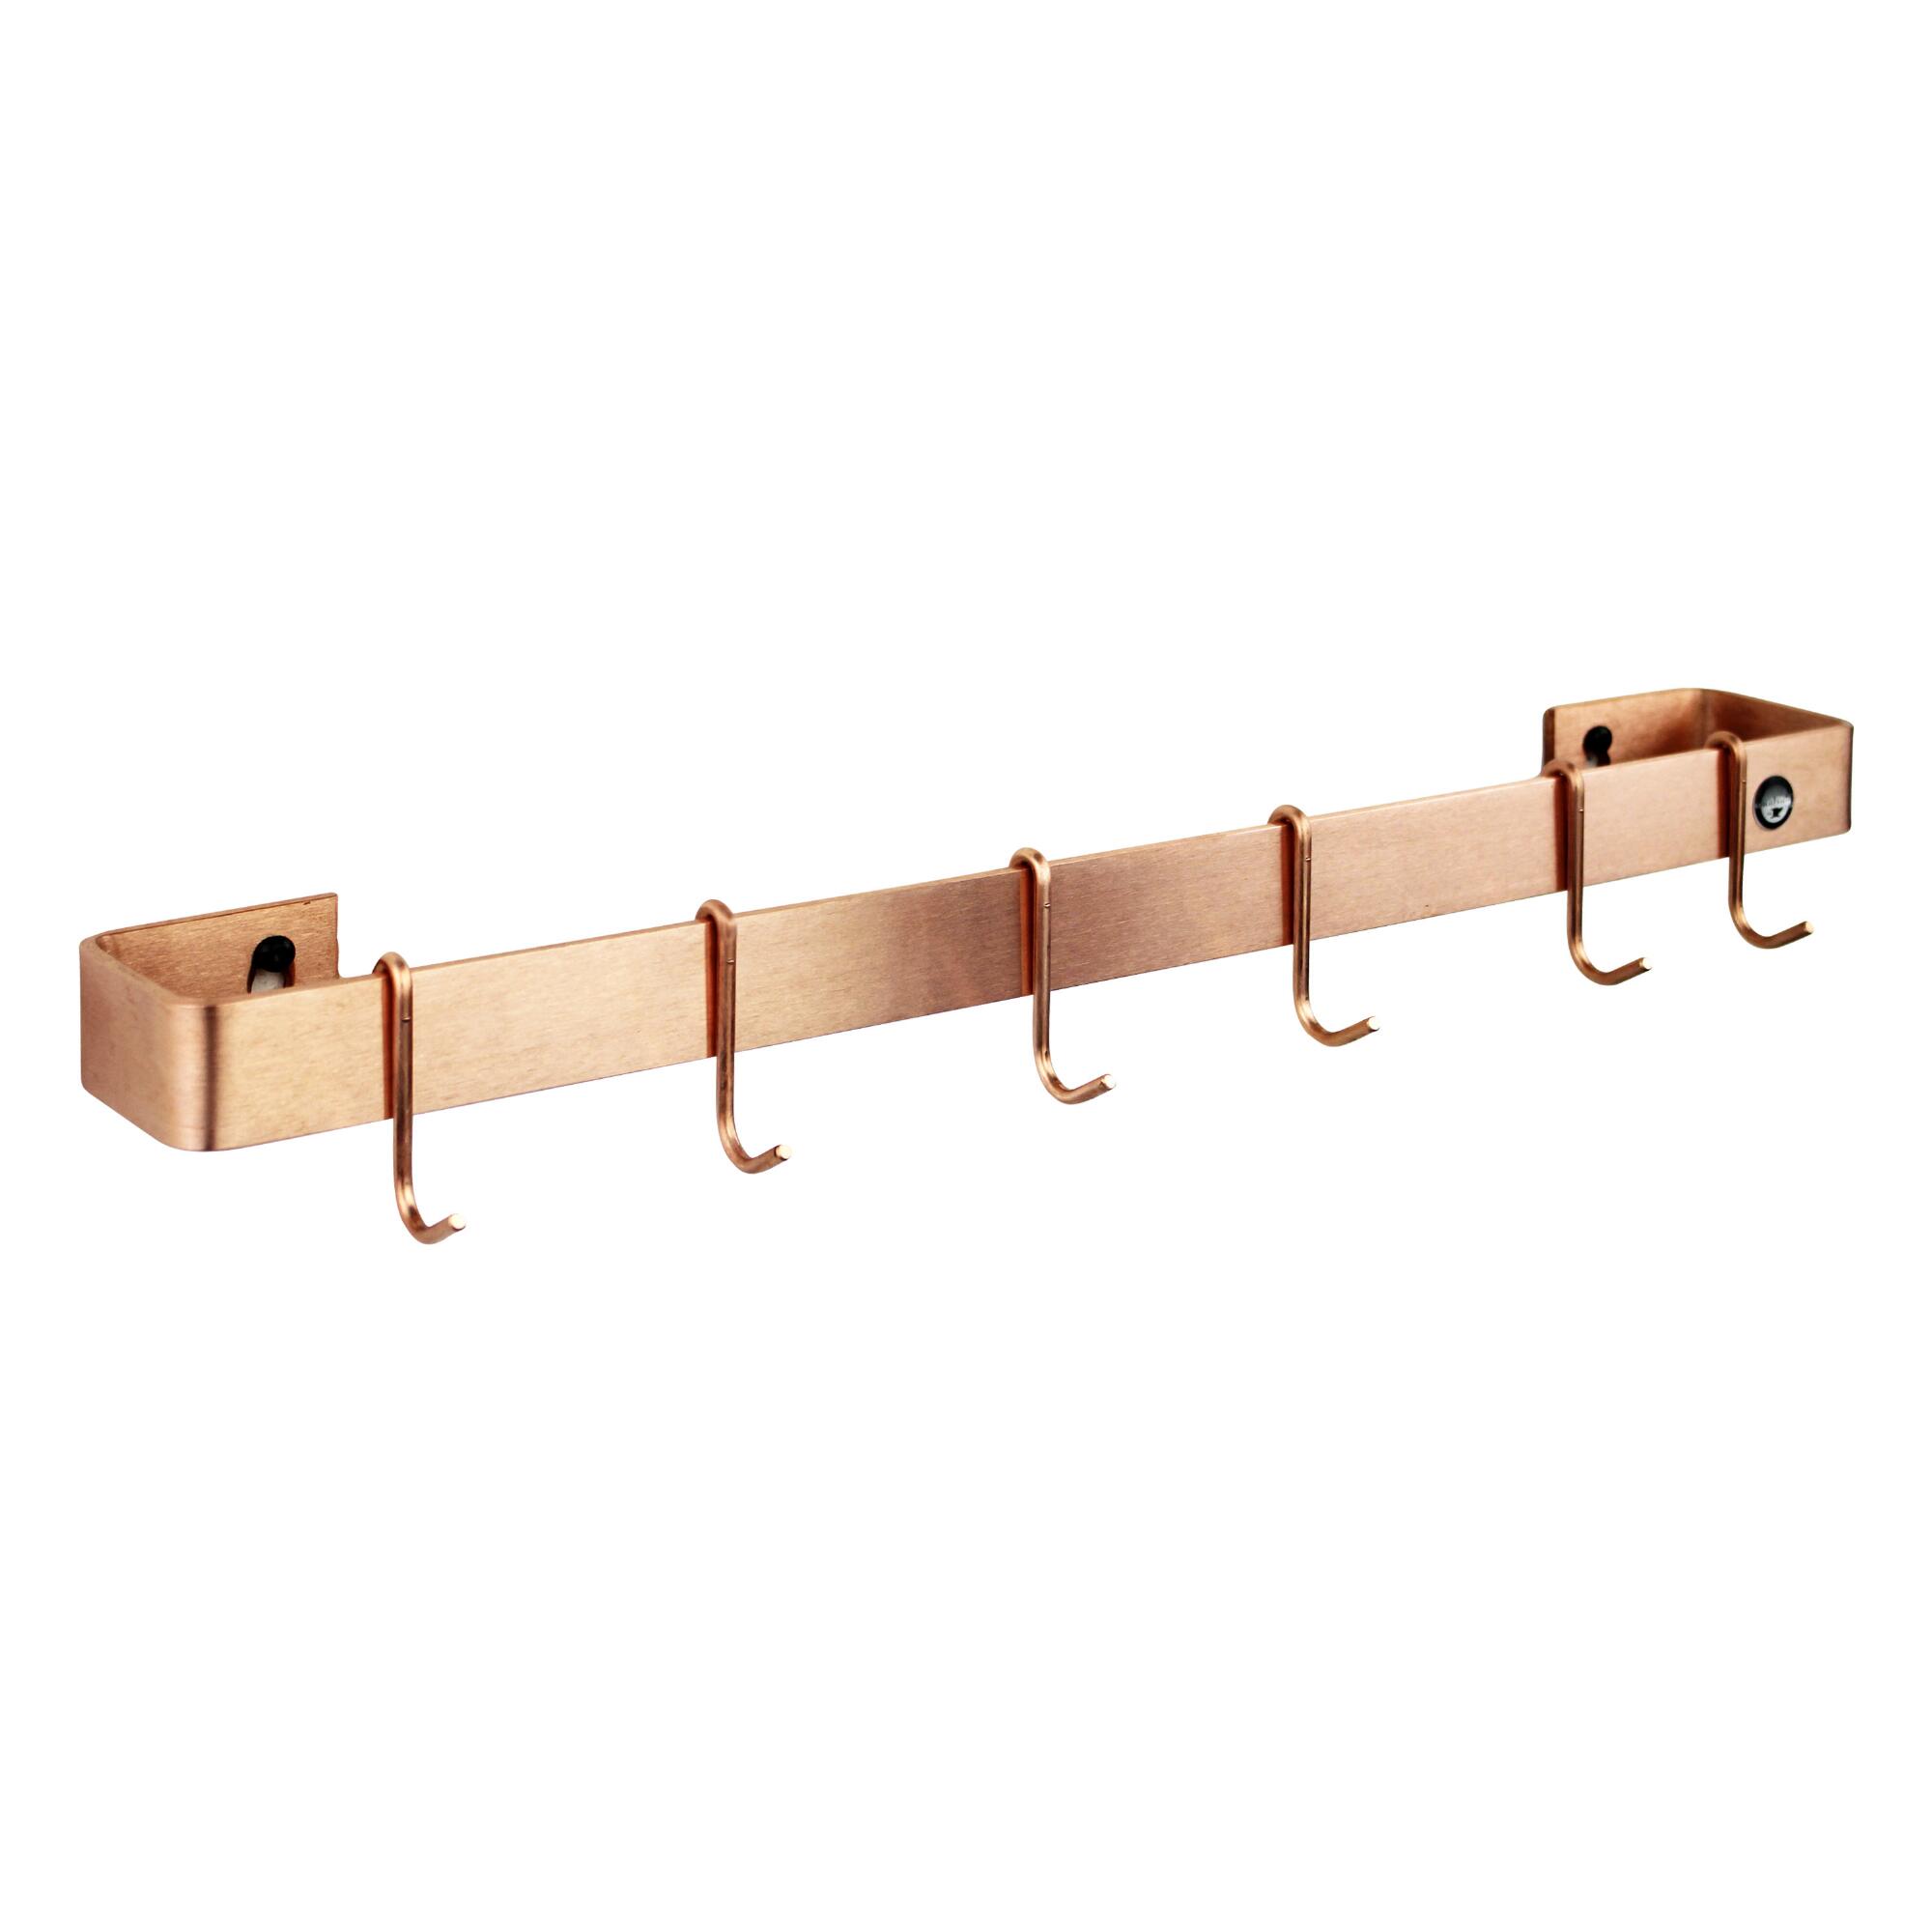 Enclume Brushed Copper Wall Pot Rack by World Market